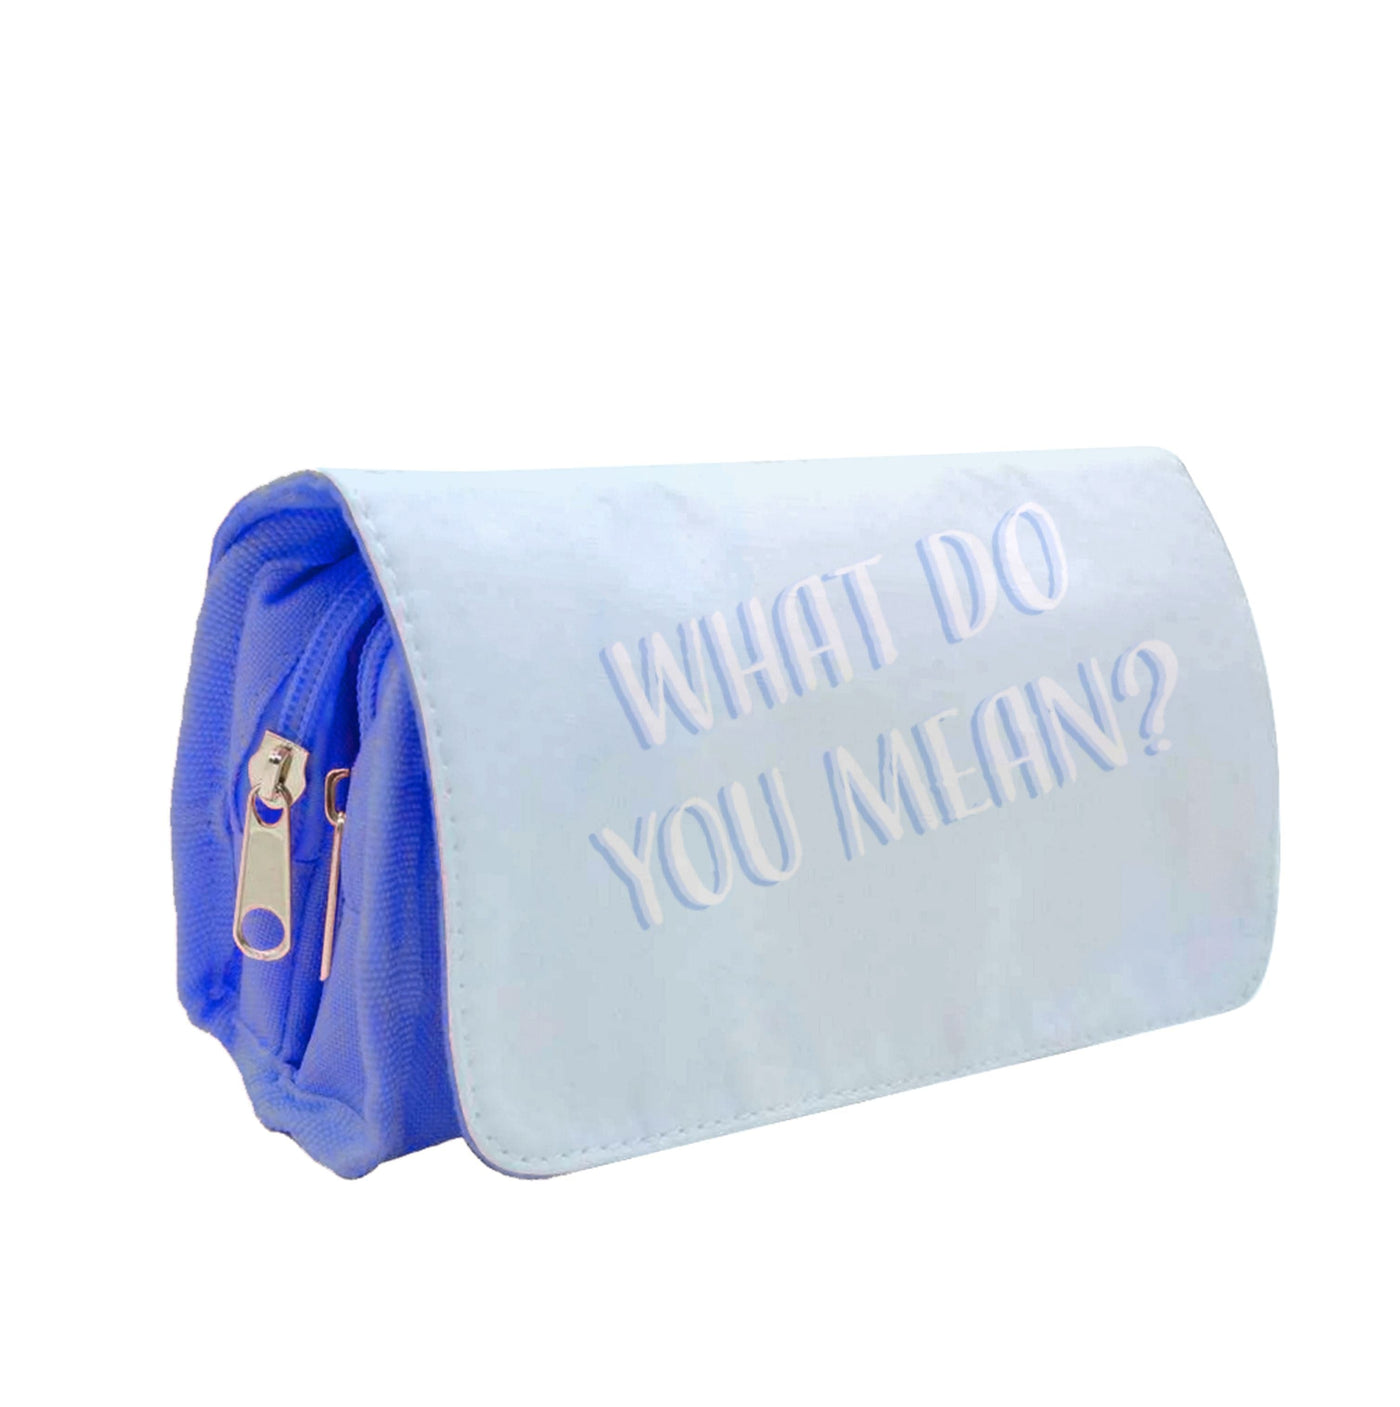 What Do You Mean - Justin Pencil Case